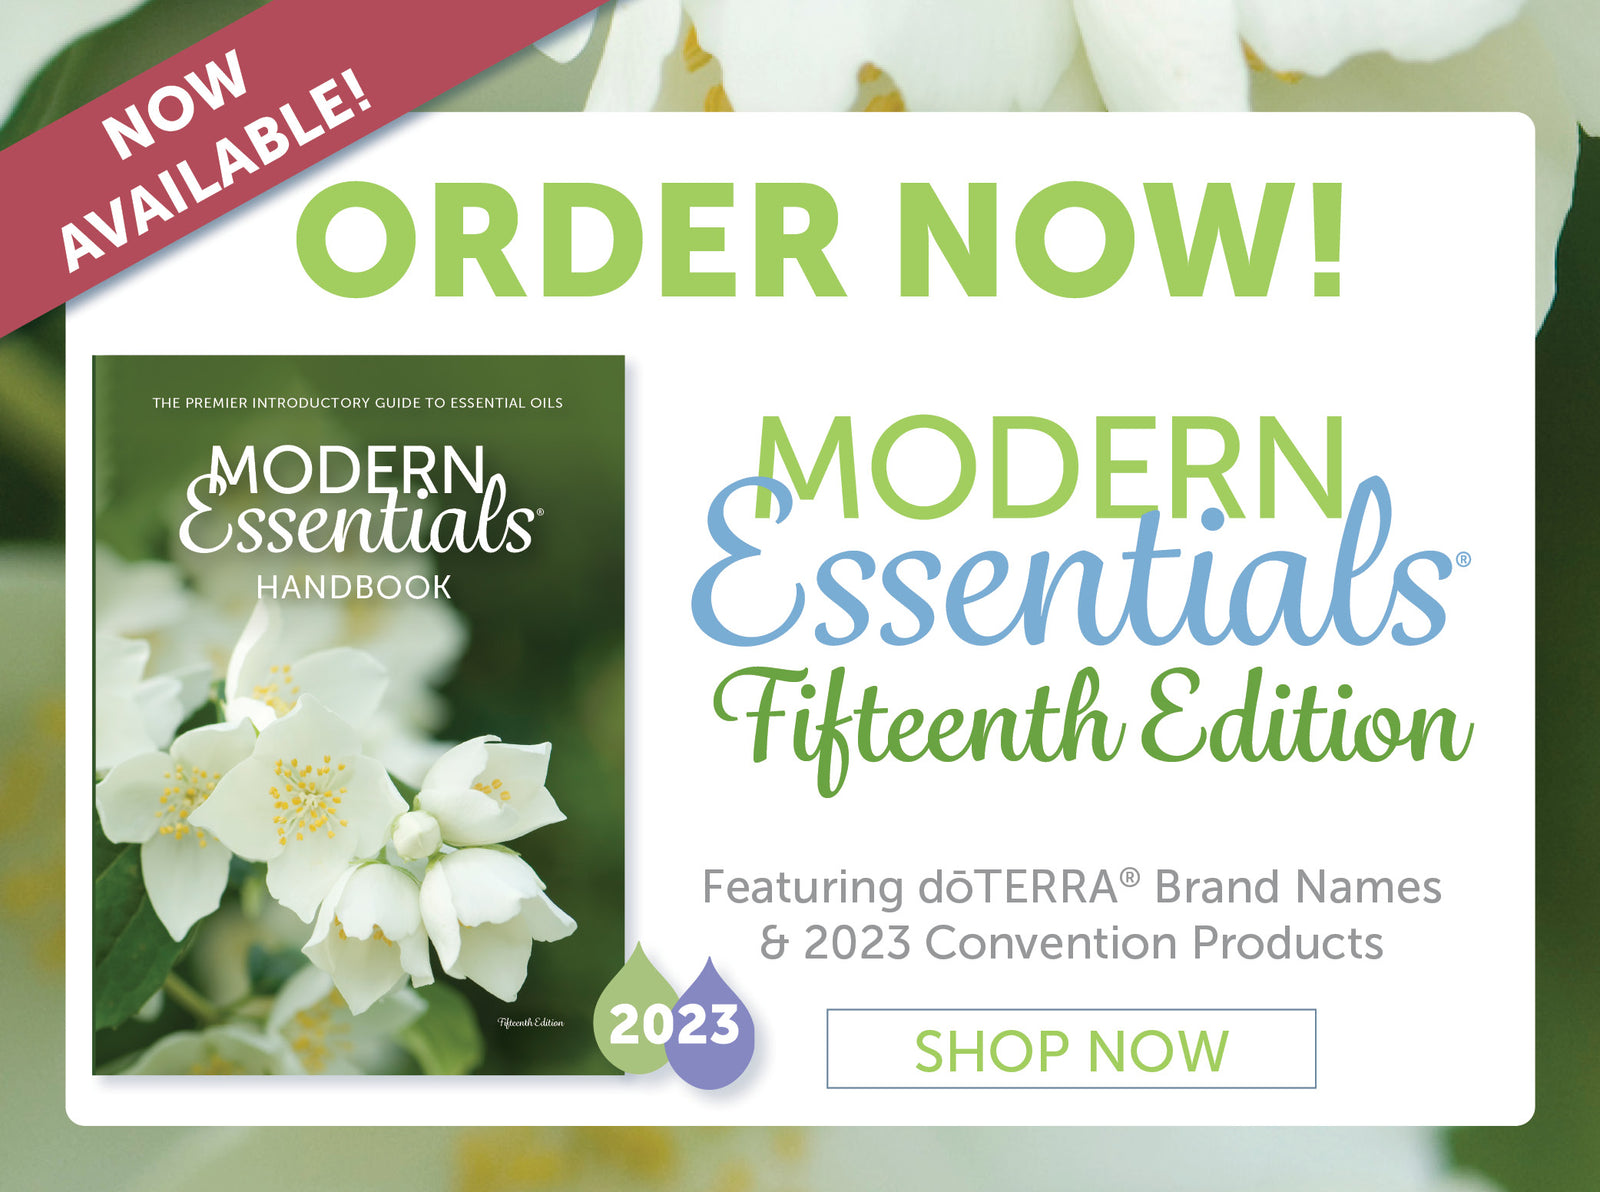 Modern Essentials HANDBOOK: The Premier Introductory Guide to the  Therapeutic Use of Essential Oils, 13th Edition - September 2021, (Sold  Individually)